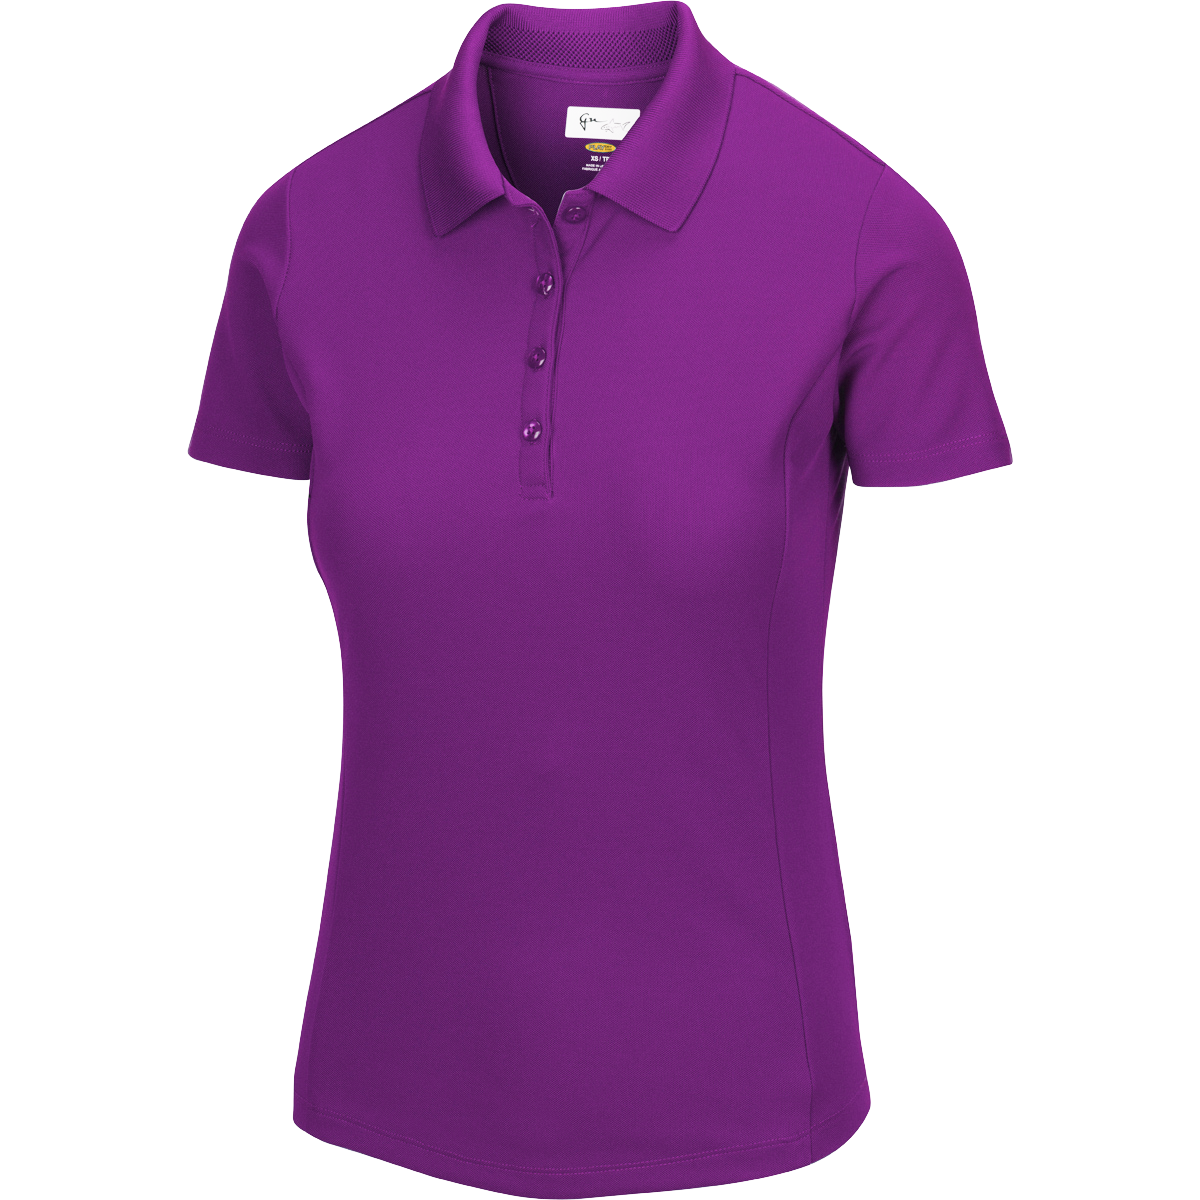 Image of Short Sleeve Play Dry Protek Micro Pique Polo